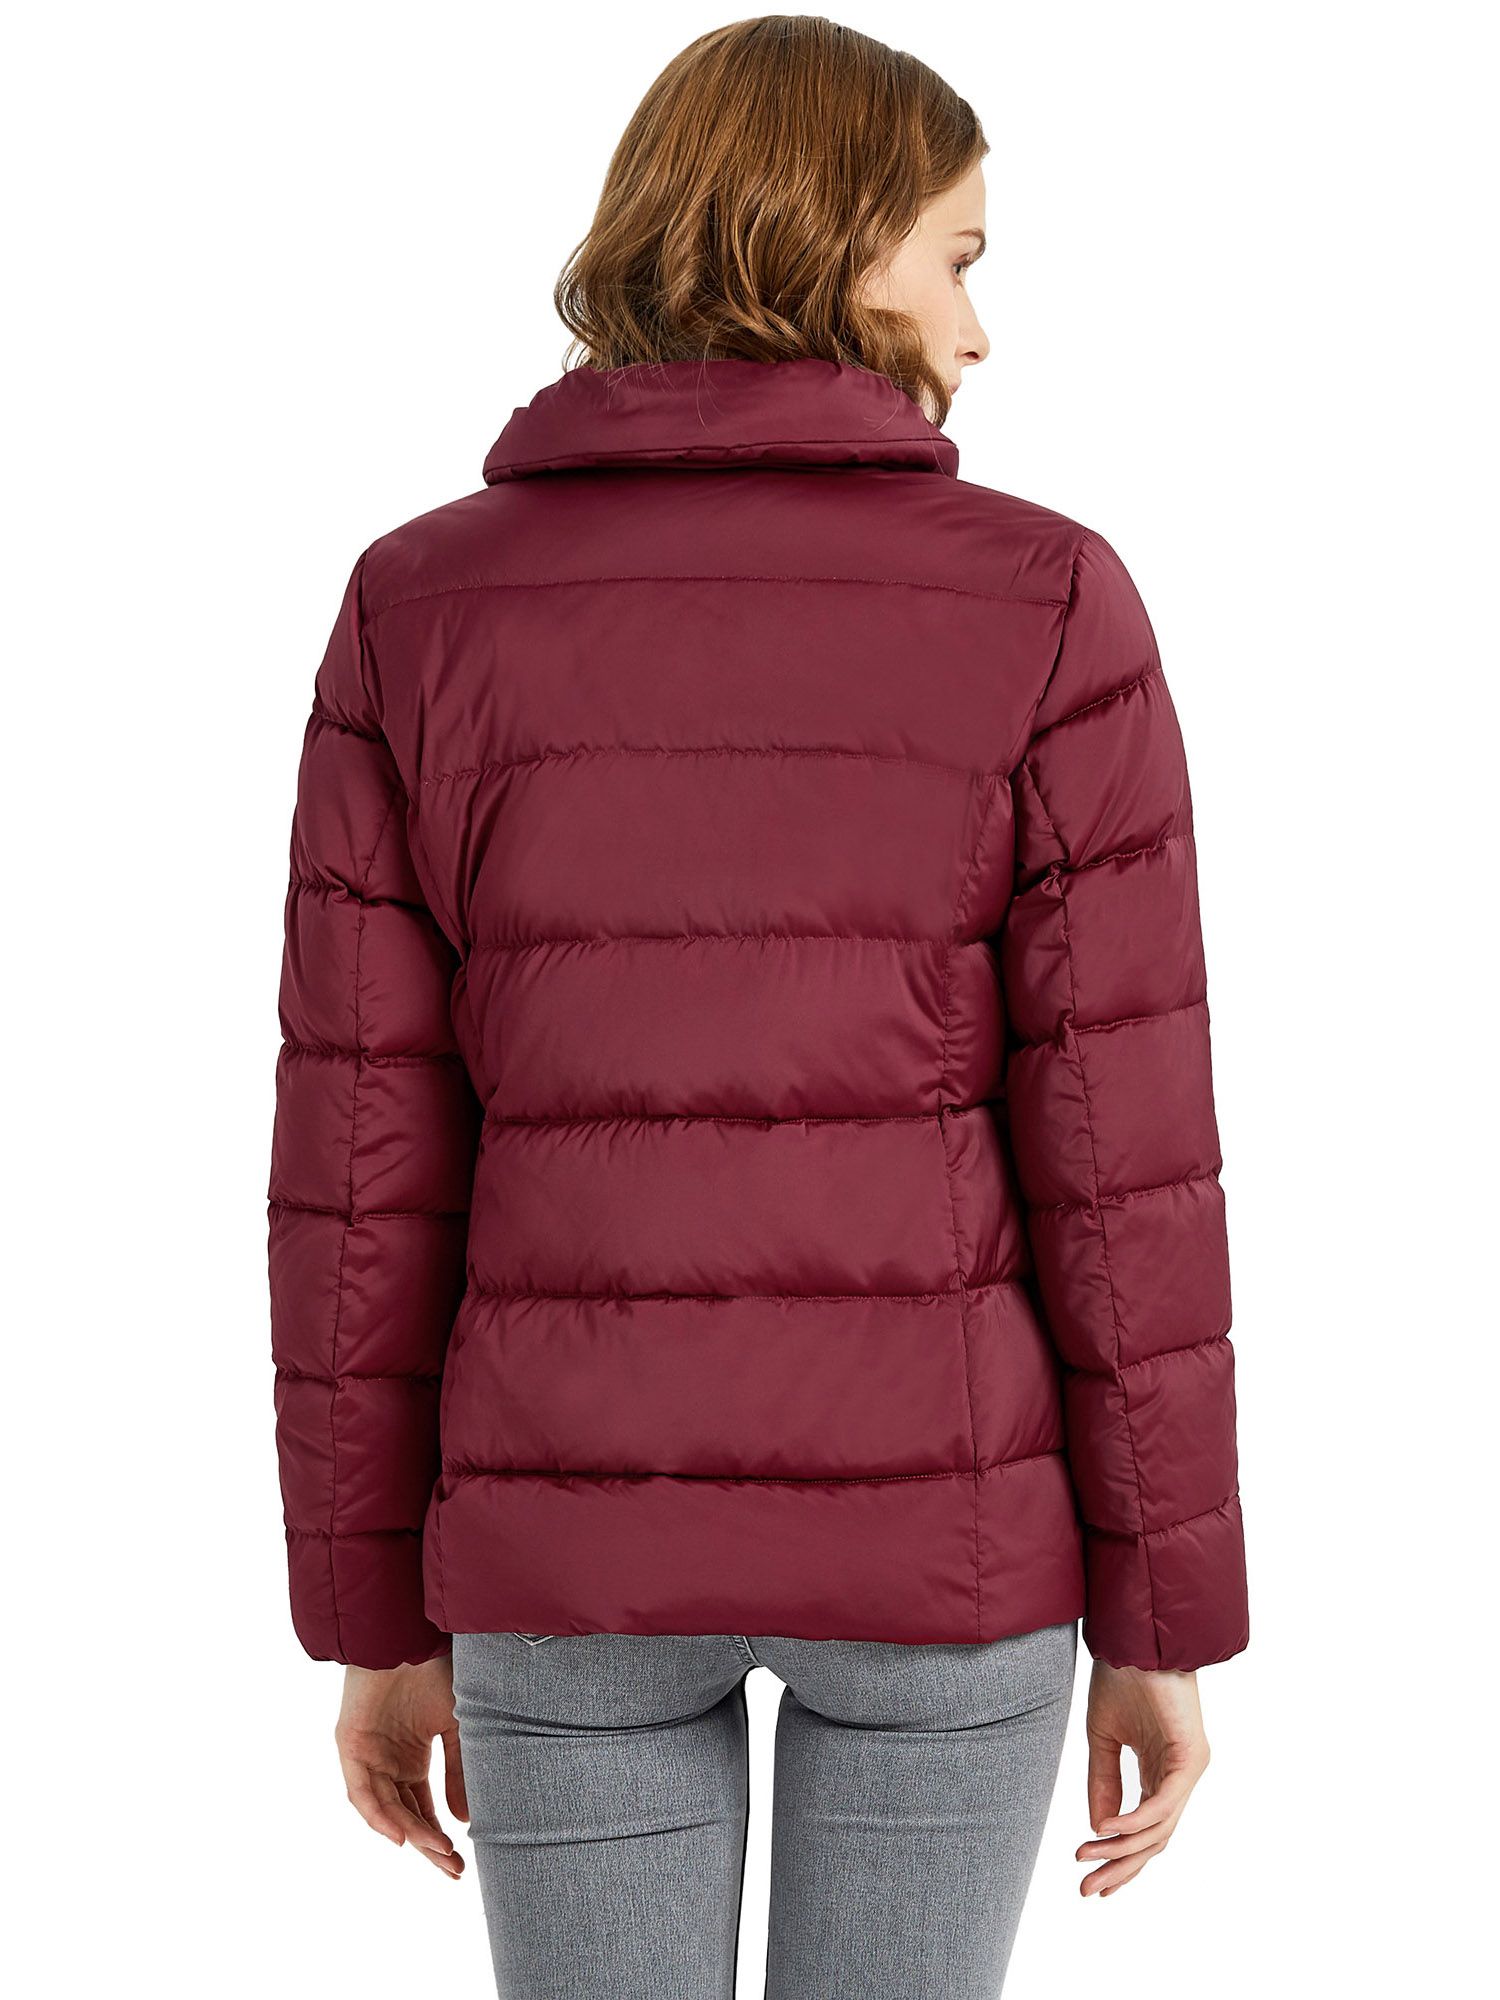 Orolay Hooded Down Jacket Women Winter Stand Collar Oblique Placket Puffer Coat - image 3 of 5